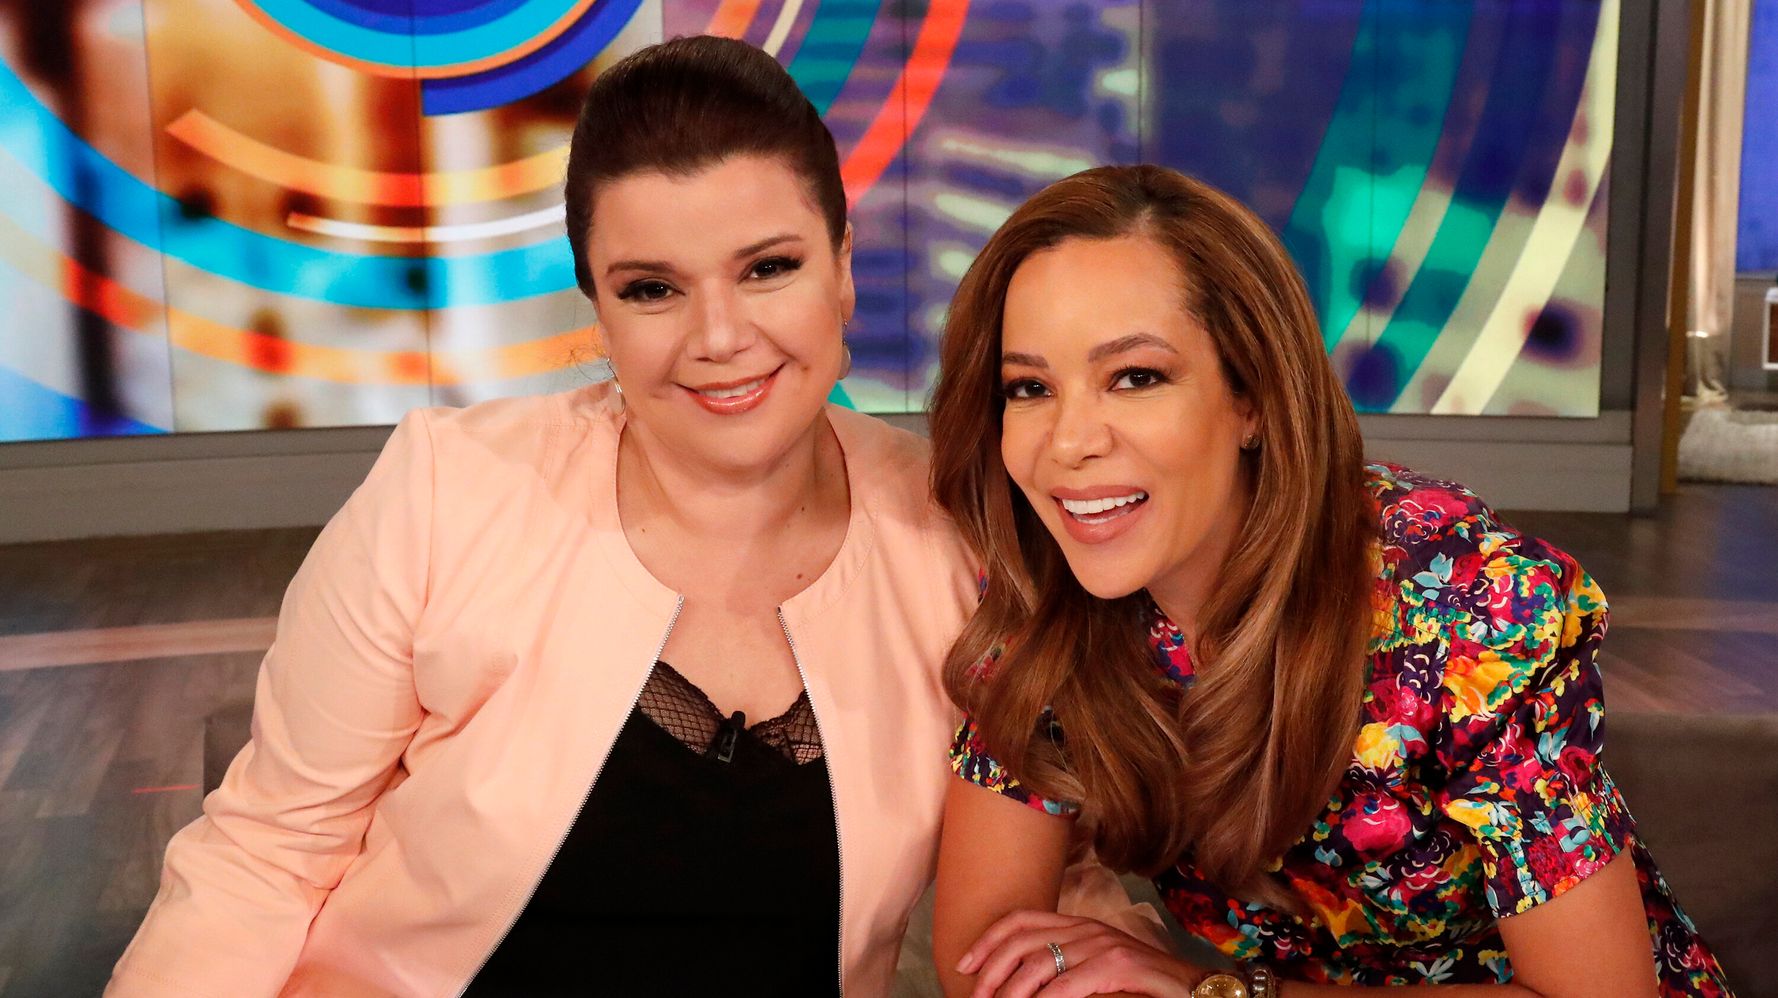 Sunny Hostin, Ana Navarro Step Off 'The View' Set After Positive COVID Tests